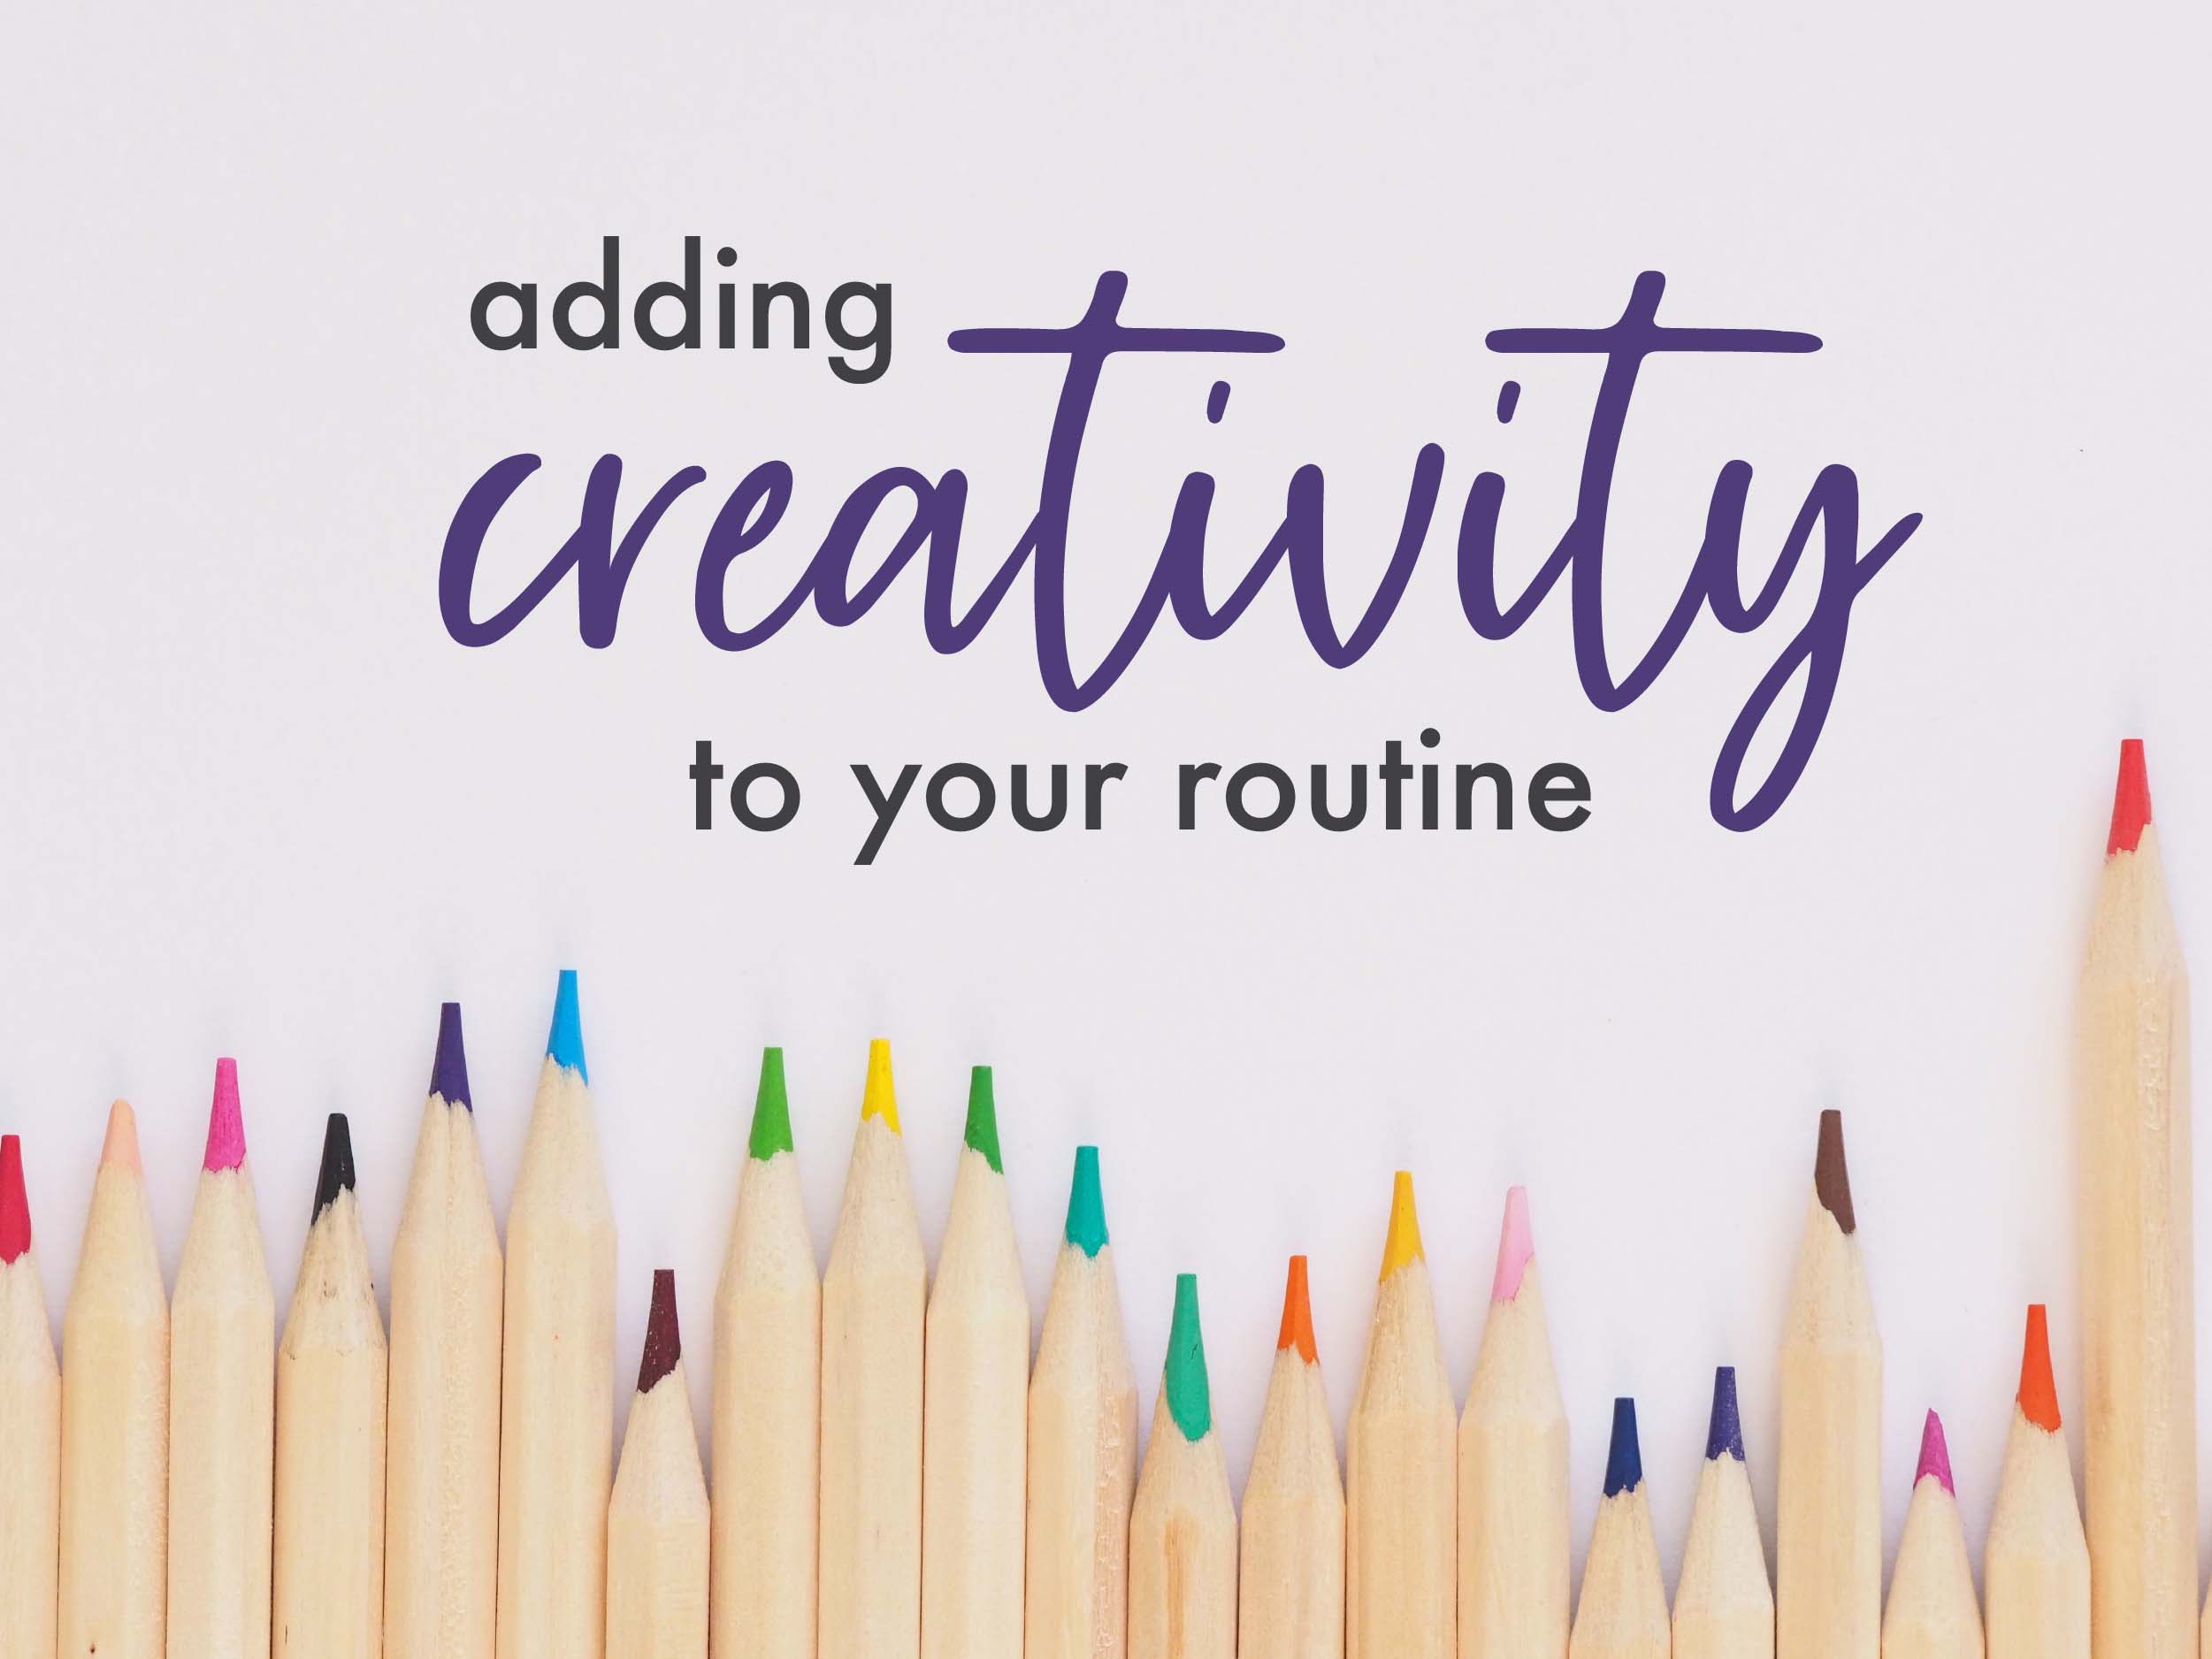 adding creativity to your routine with colored pencils underneath